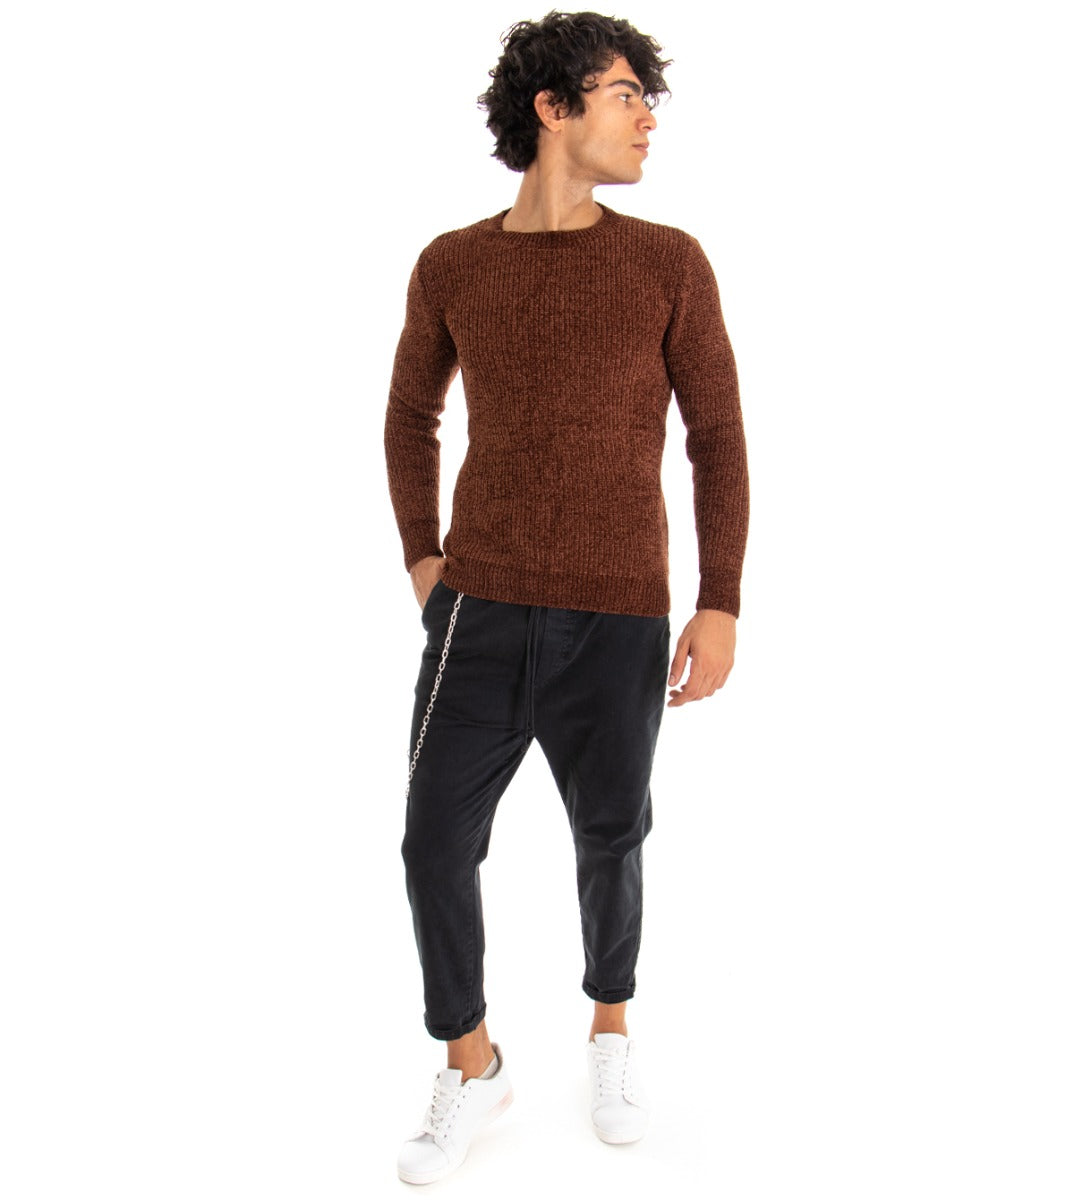 Men's Solid Color Sweater Tobacco Round Neck Long Sleeves Casual GIOSAL